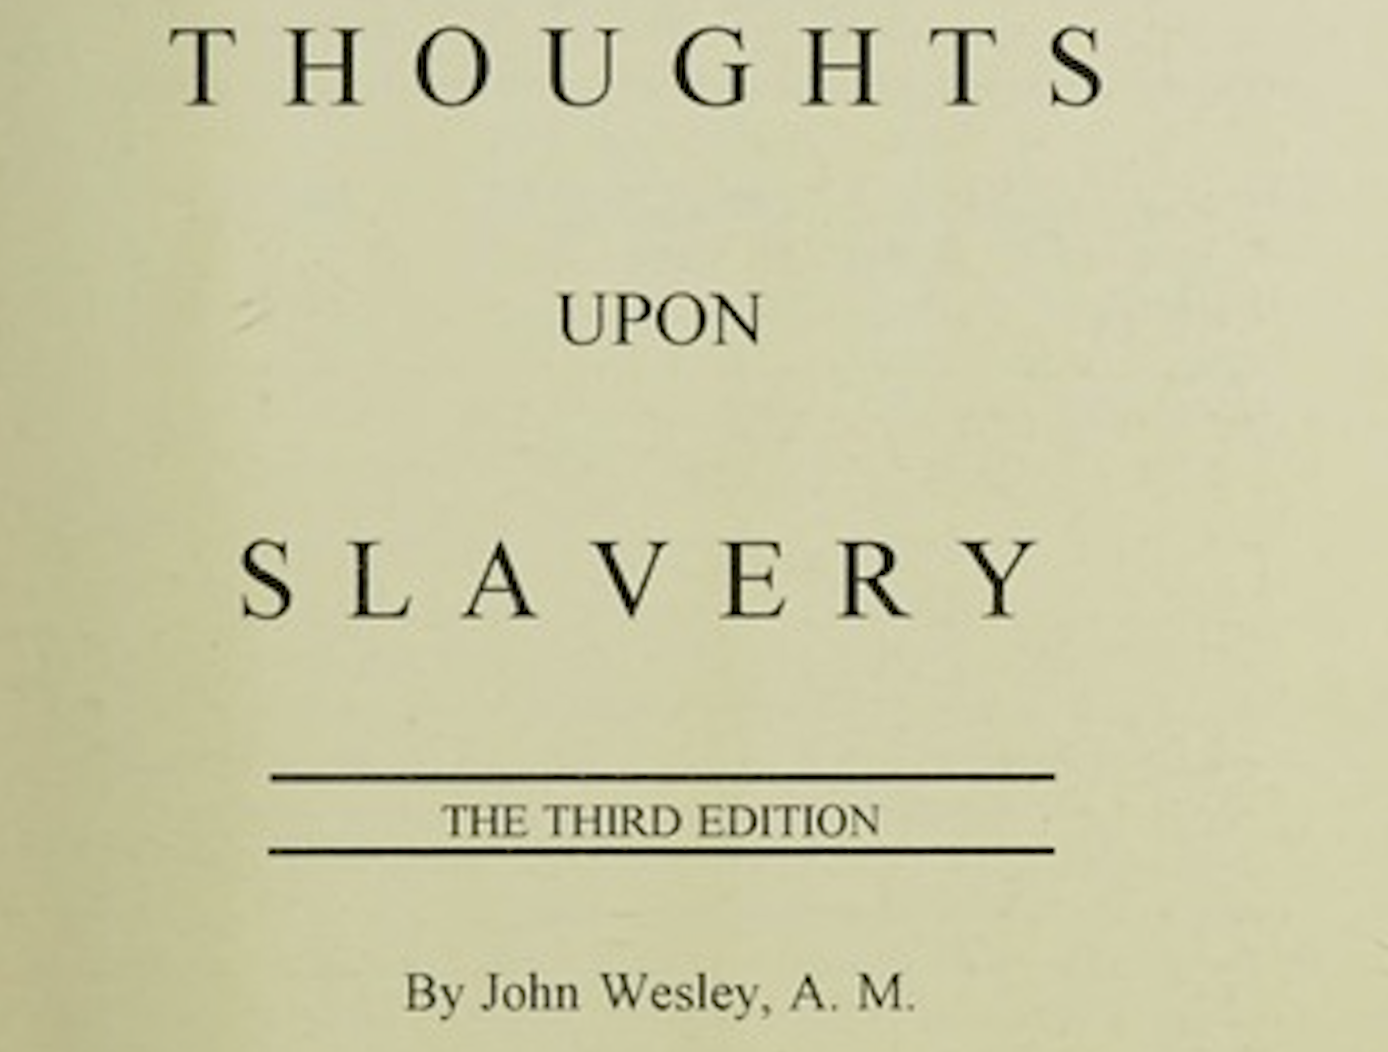 The title page for John Wesley's book, Thoughts Upon Slavery